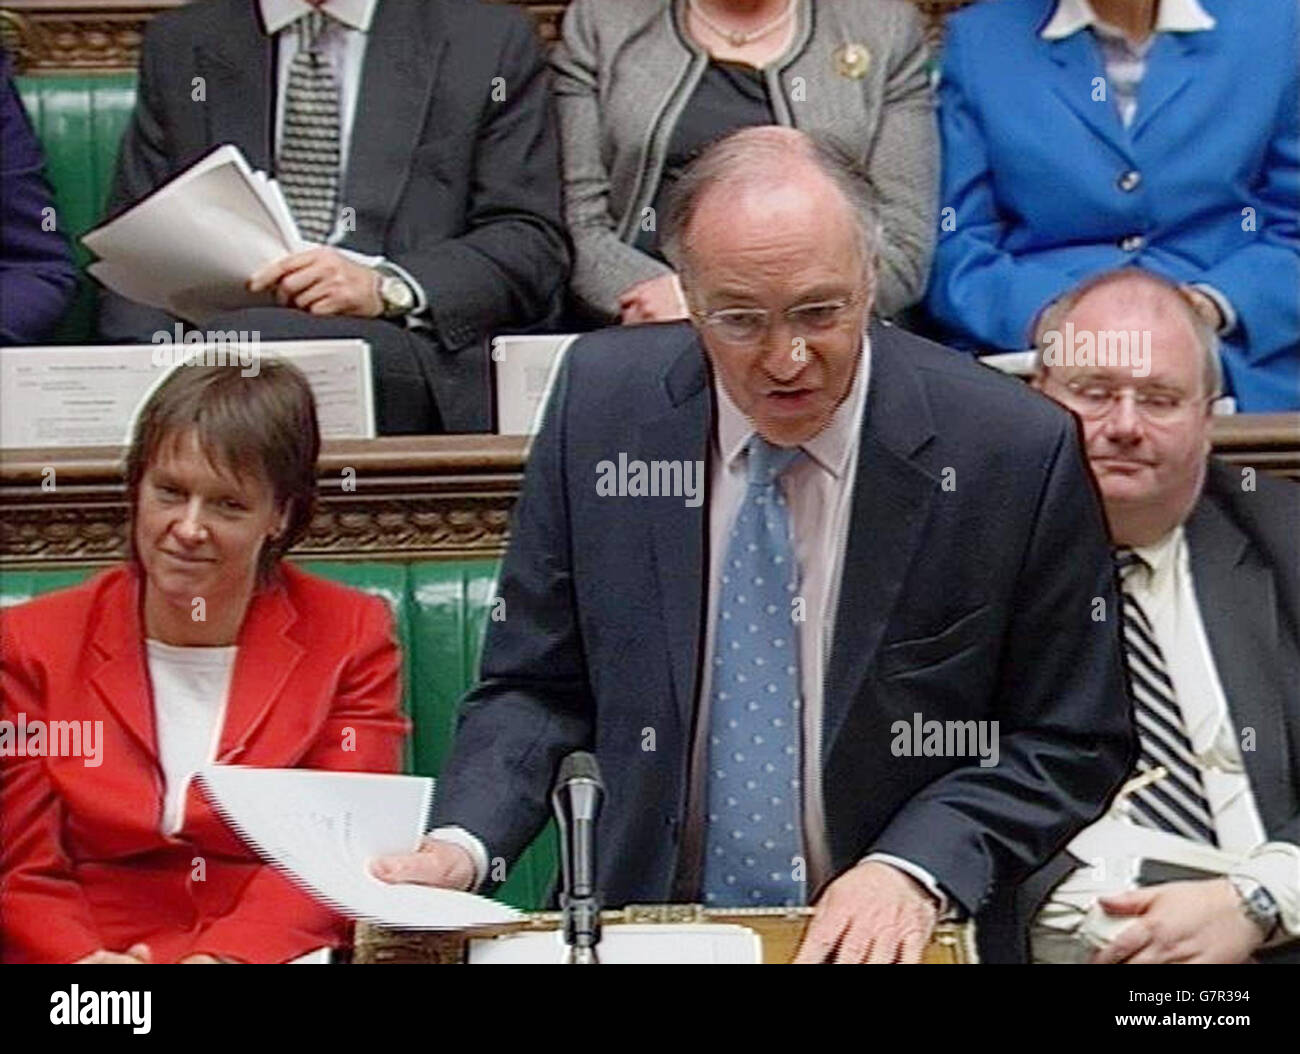 Prime Minister's Questions - House of Commons. Conservative Party leader Michael Howard. Stock Photo